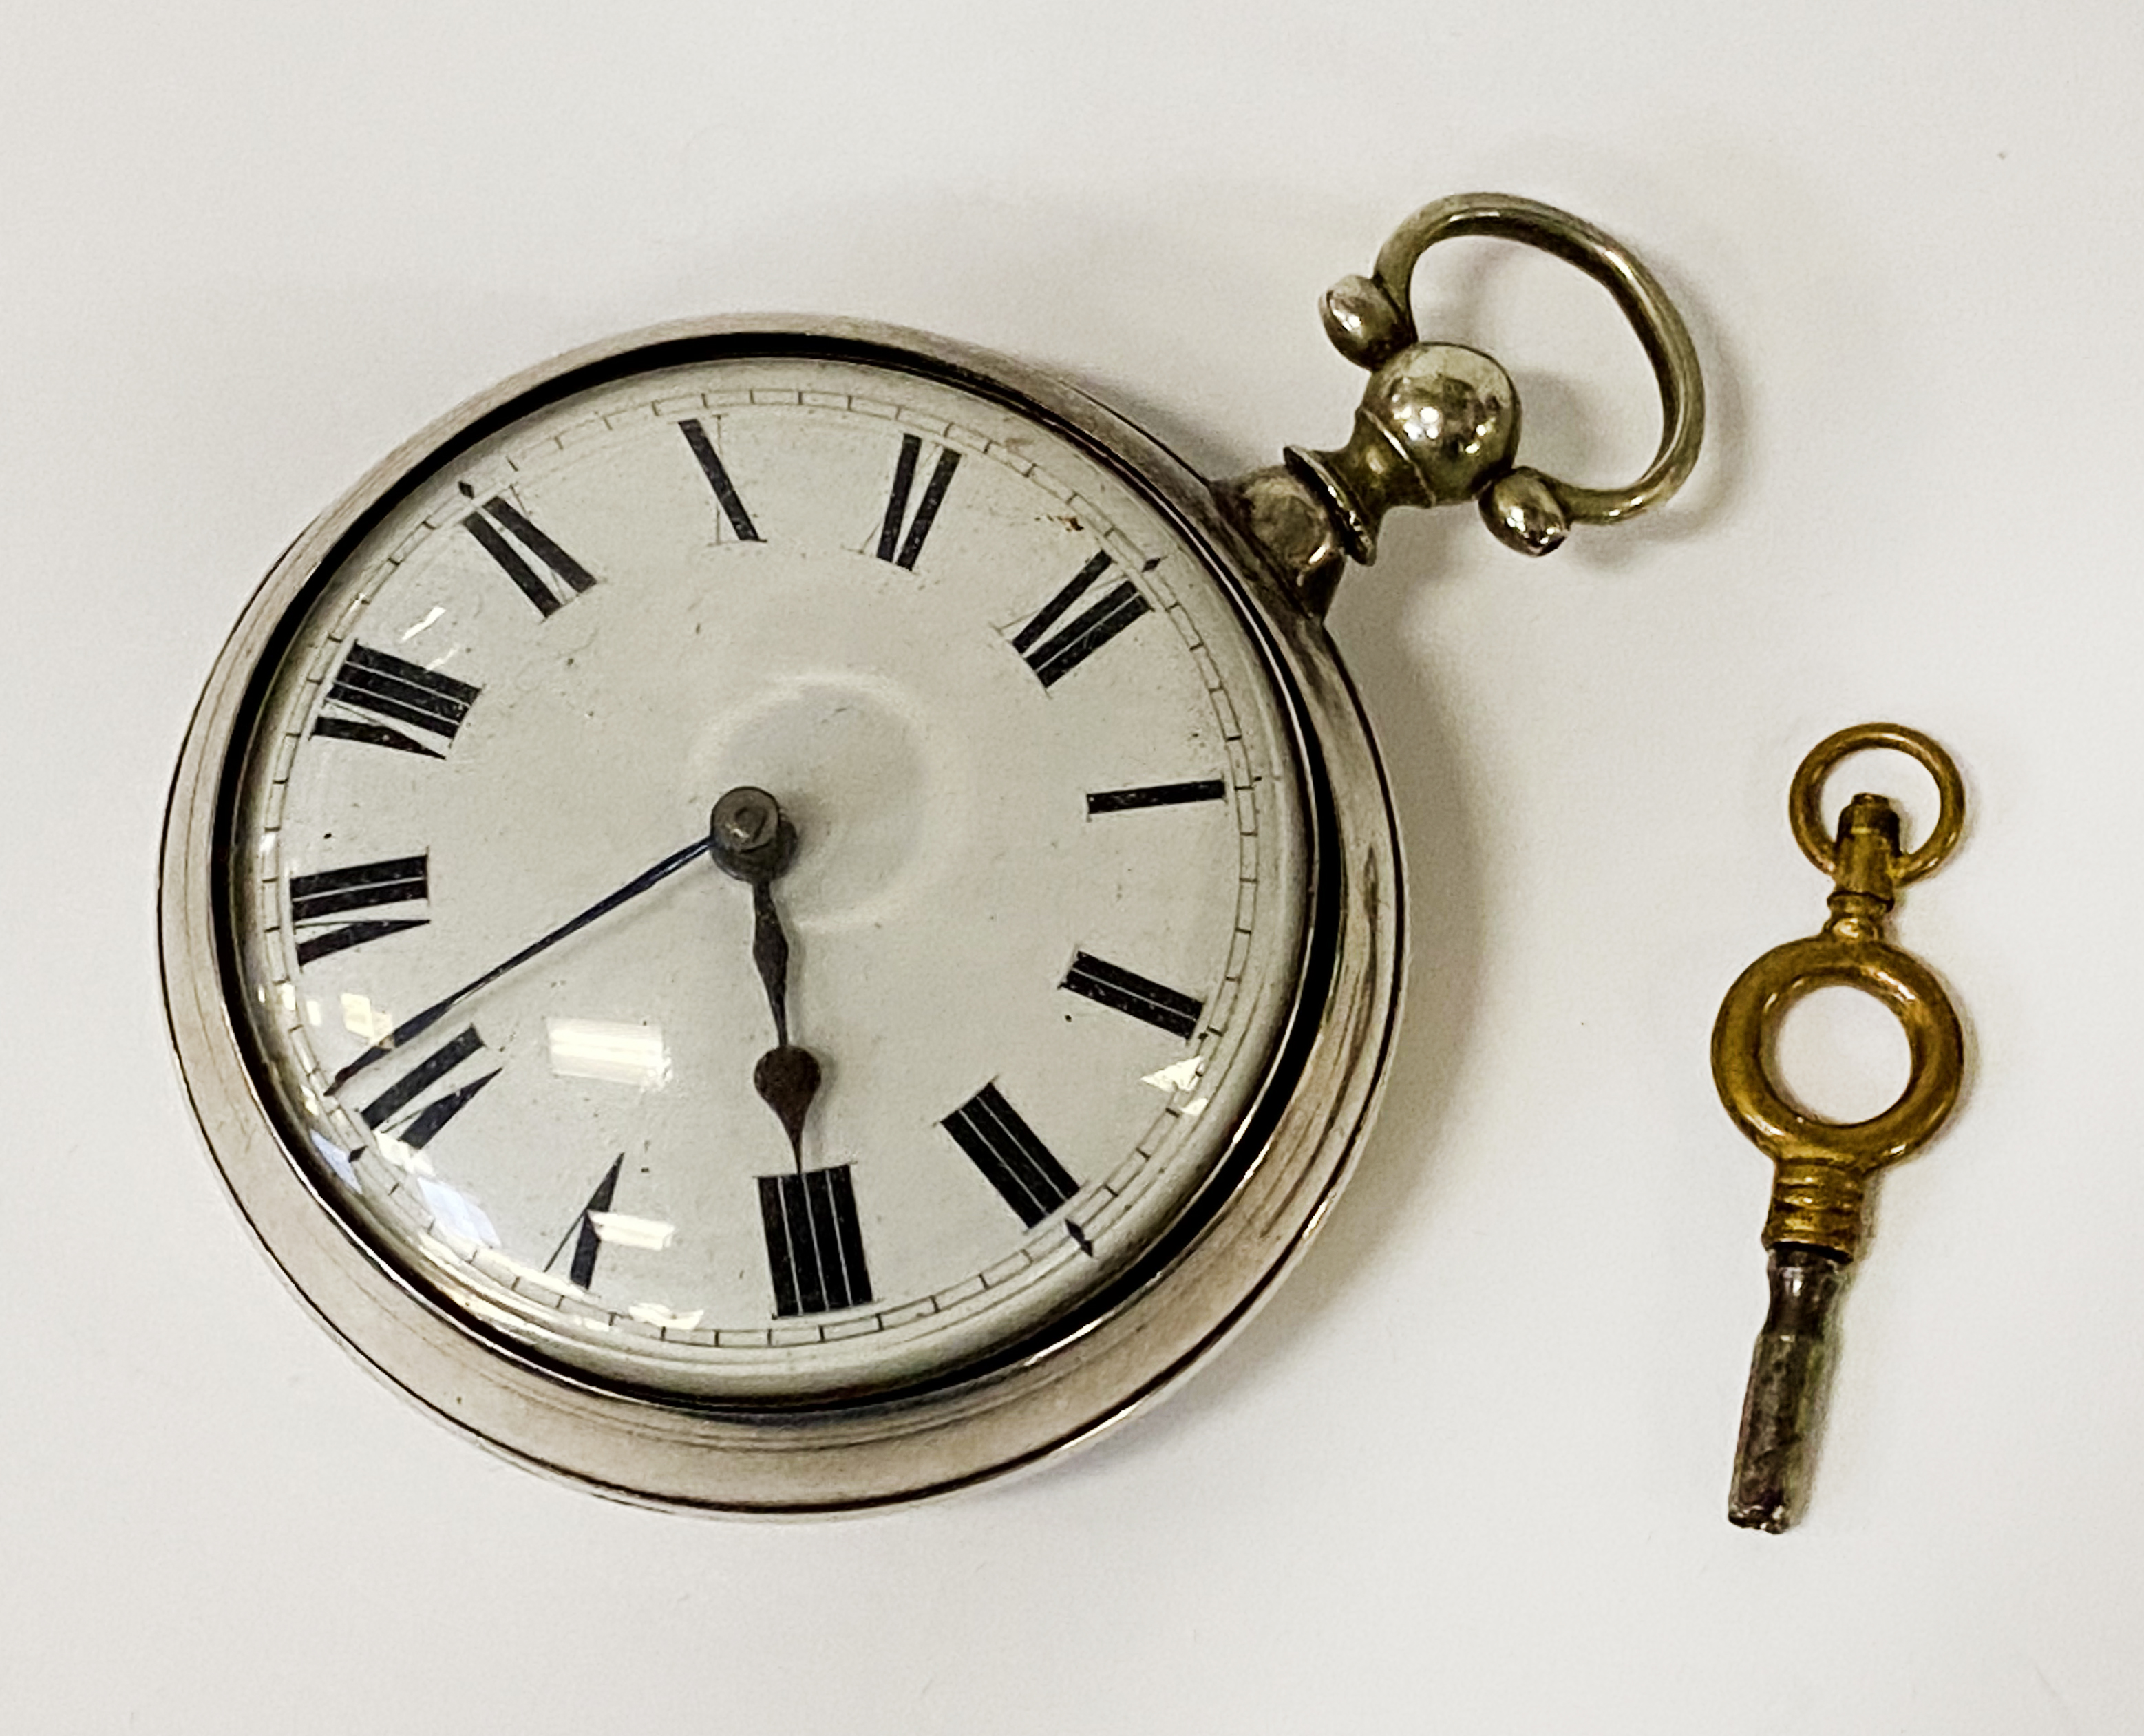 HM SILVER CASED POCKET WATCH BY SOLOMAN LEVY OF DEAL - NUMBER ARE MARKED ON THE CASE